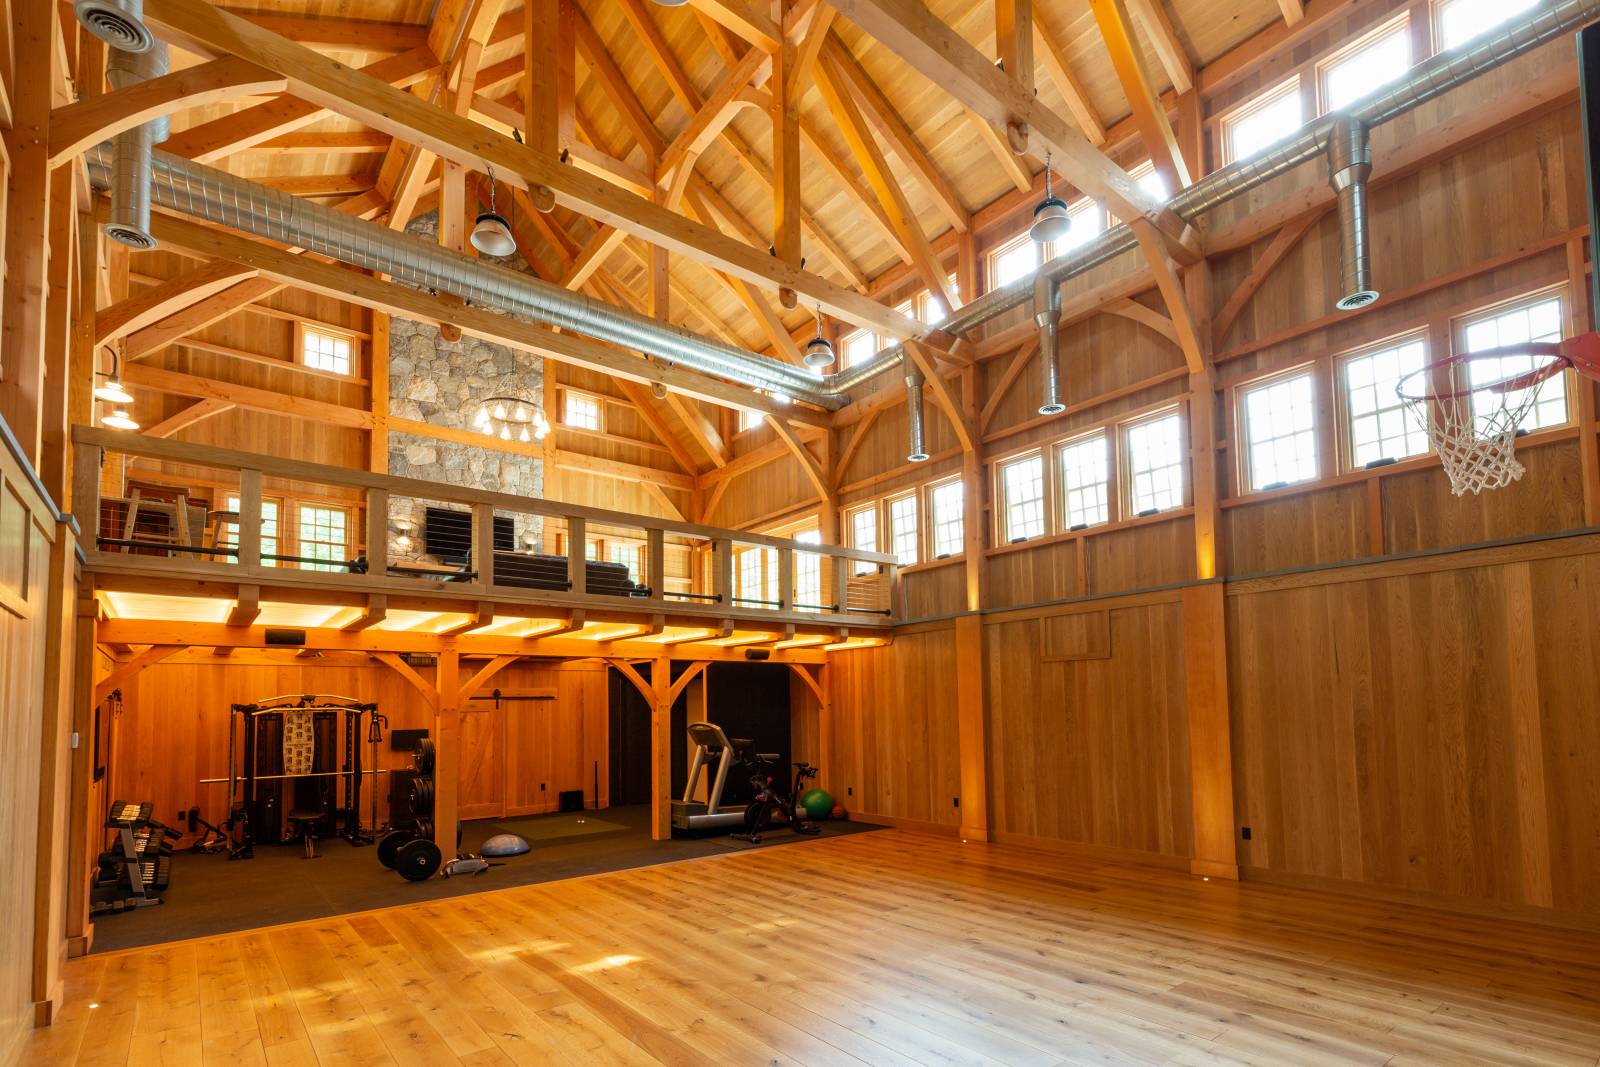 Stunning Interior of this 32' x 50' Custom Timber Frame Barn with Indoor Basketball Court